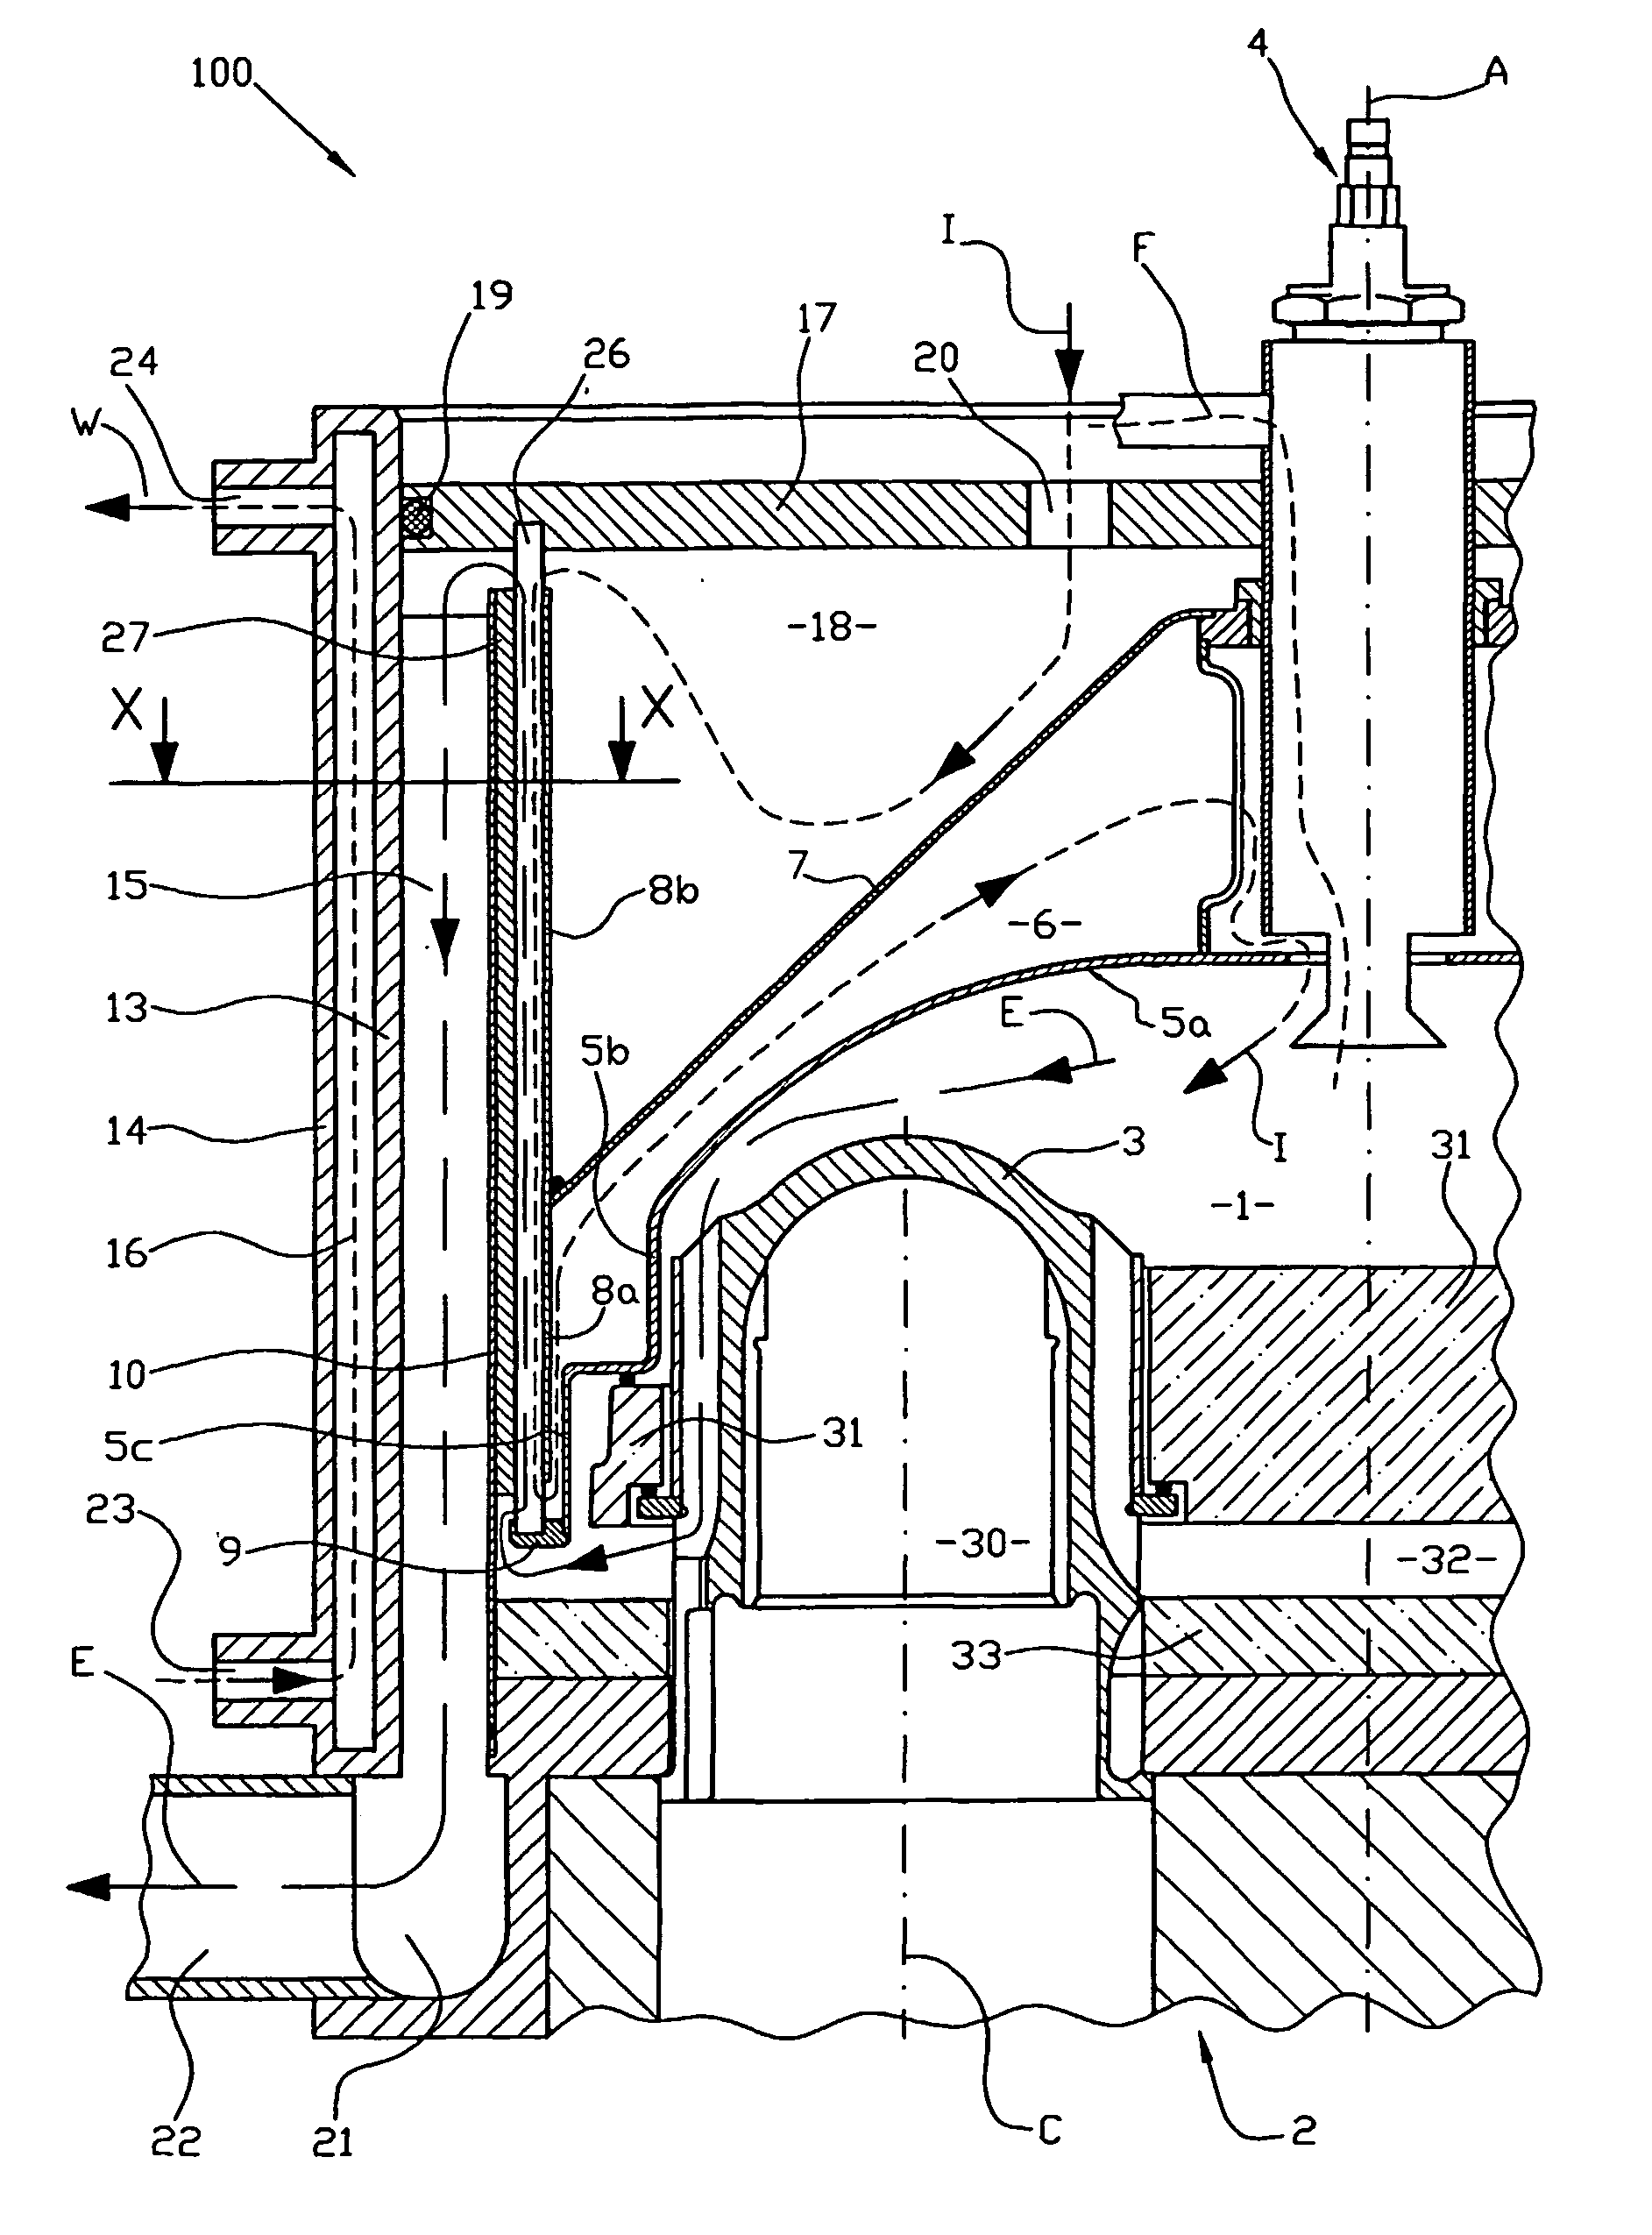 Recuperative heater for an external combustion engine